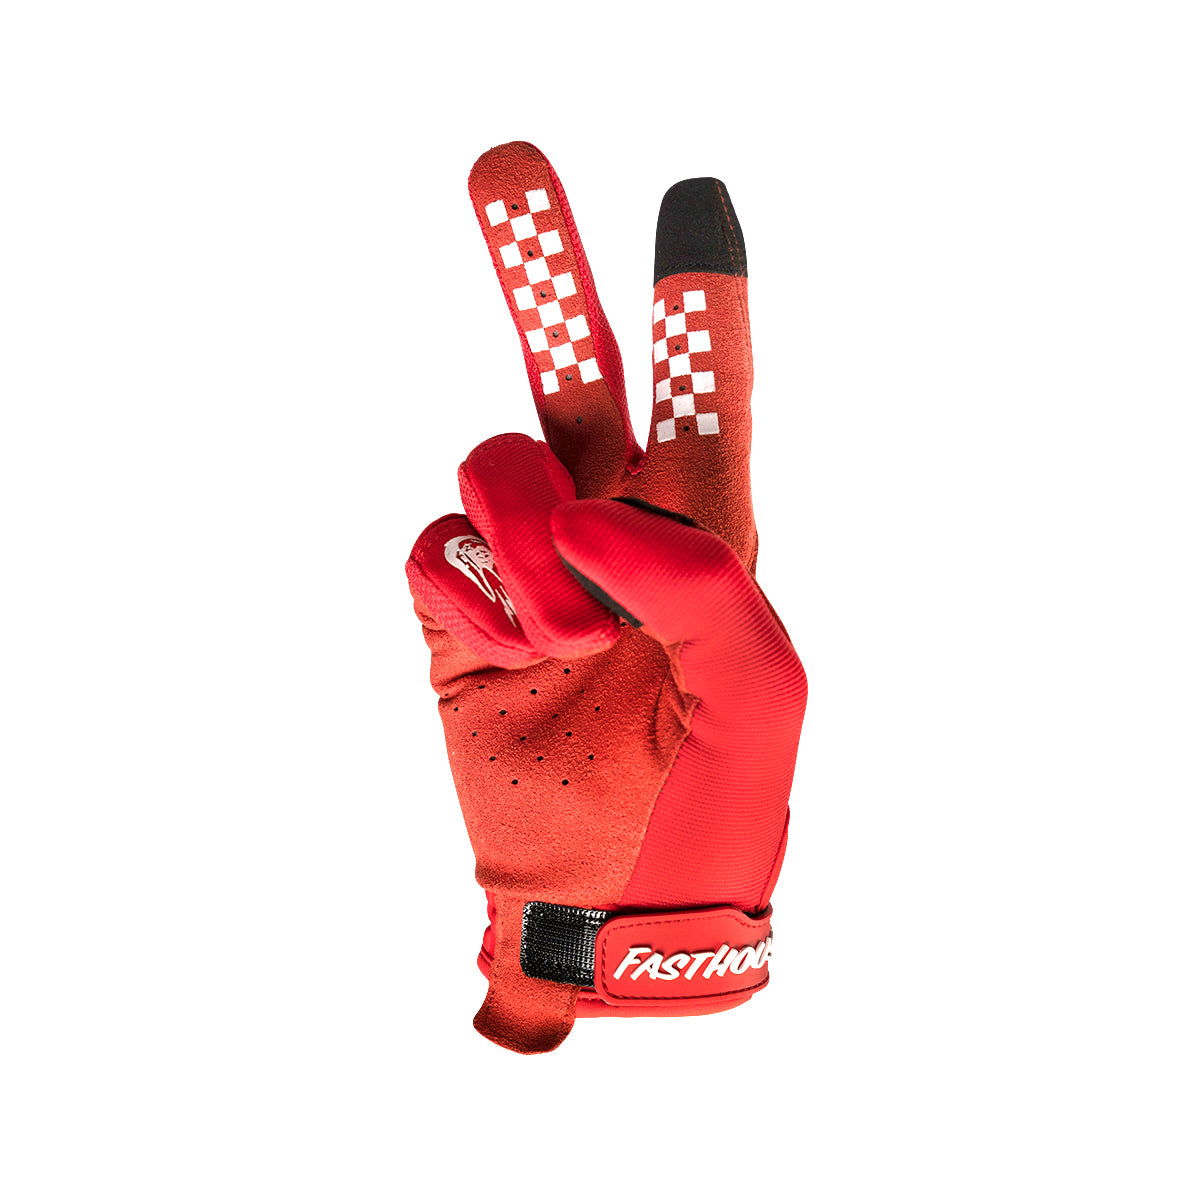 Burn Free Speed Style Youth Glove - Red